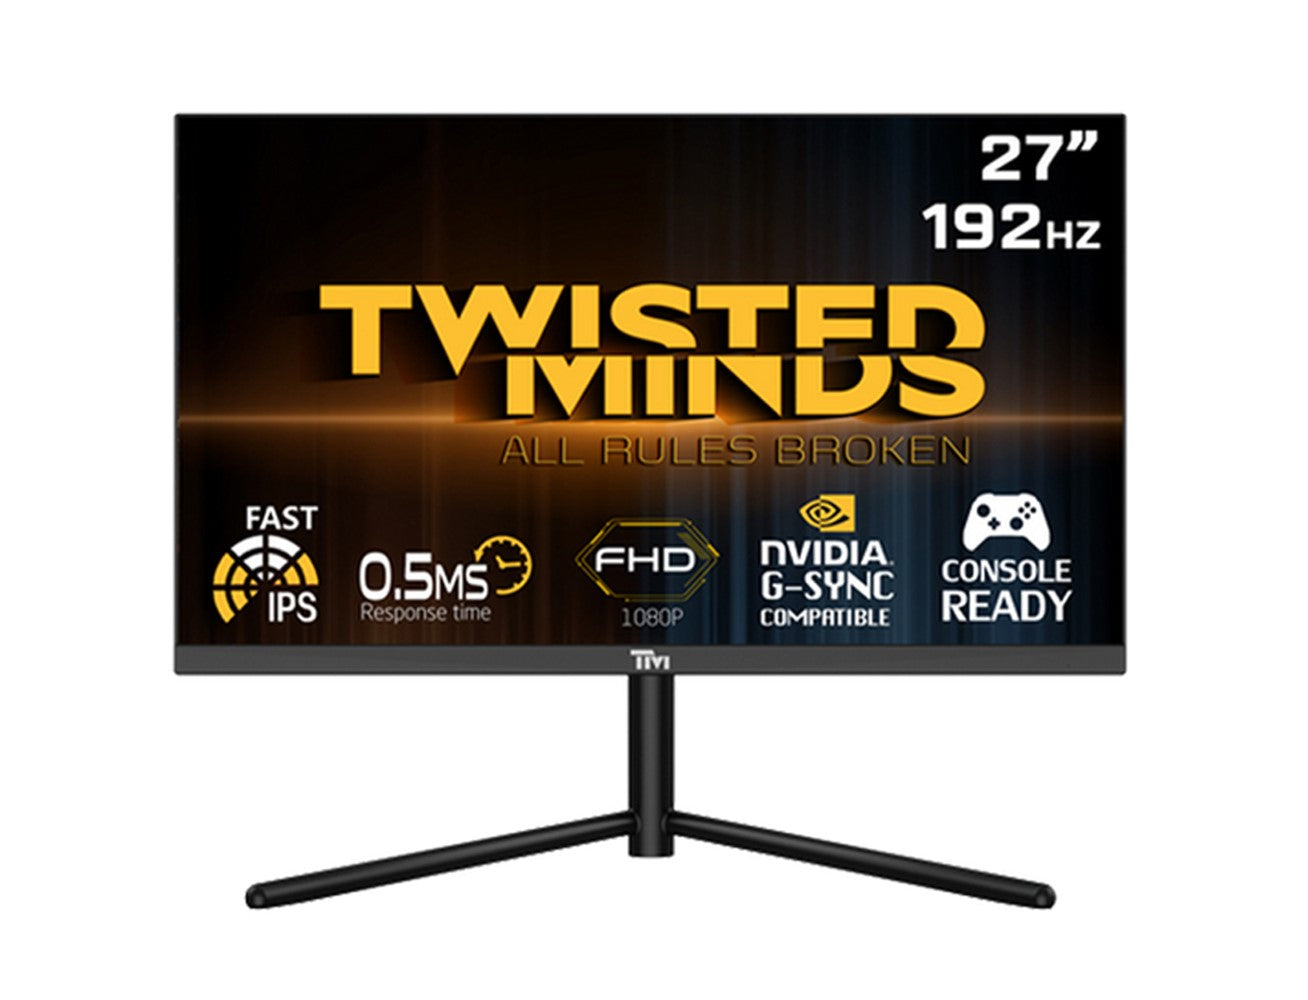 Twisted Minds 27'' Flat FHD Fast IPS,192Hz, 0.5ms, HDMI 2.1, HDR Gaming Monitor